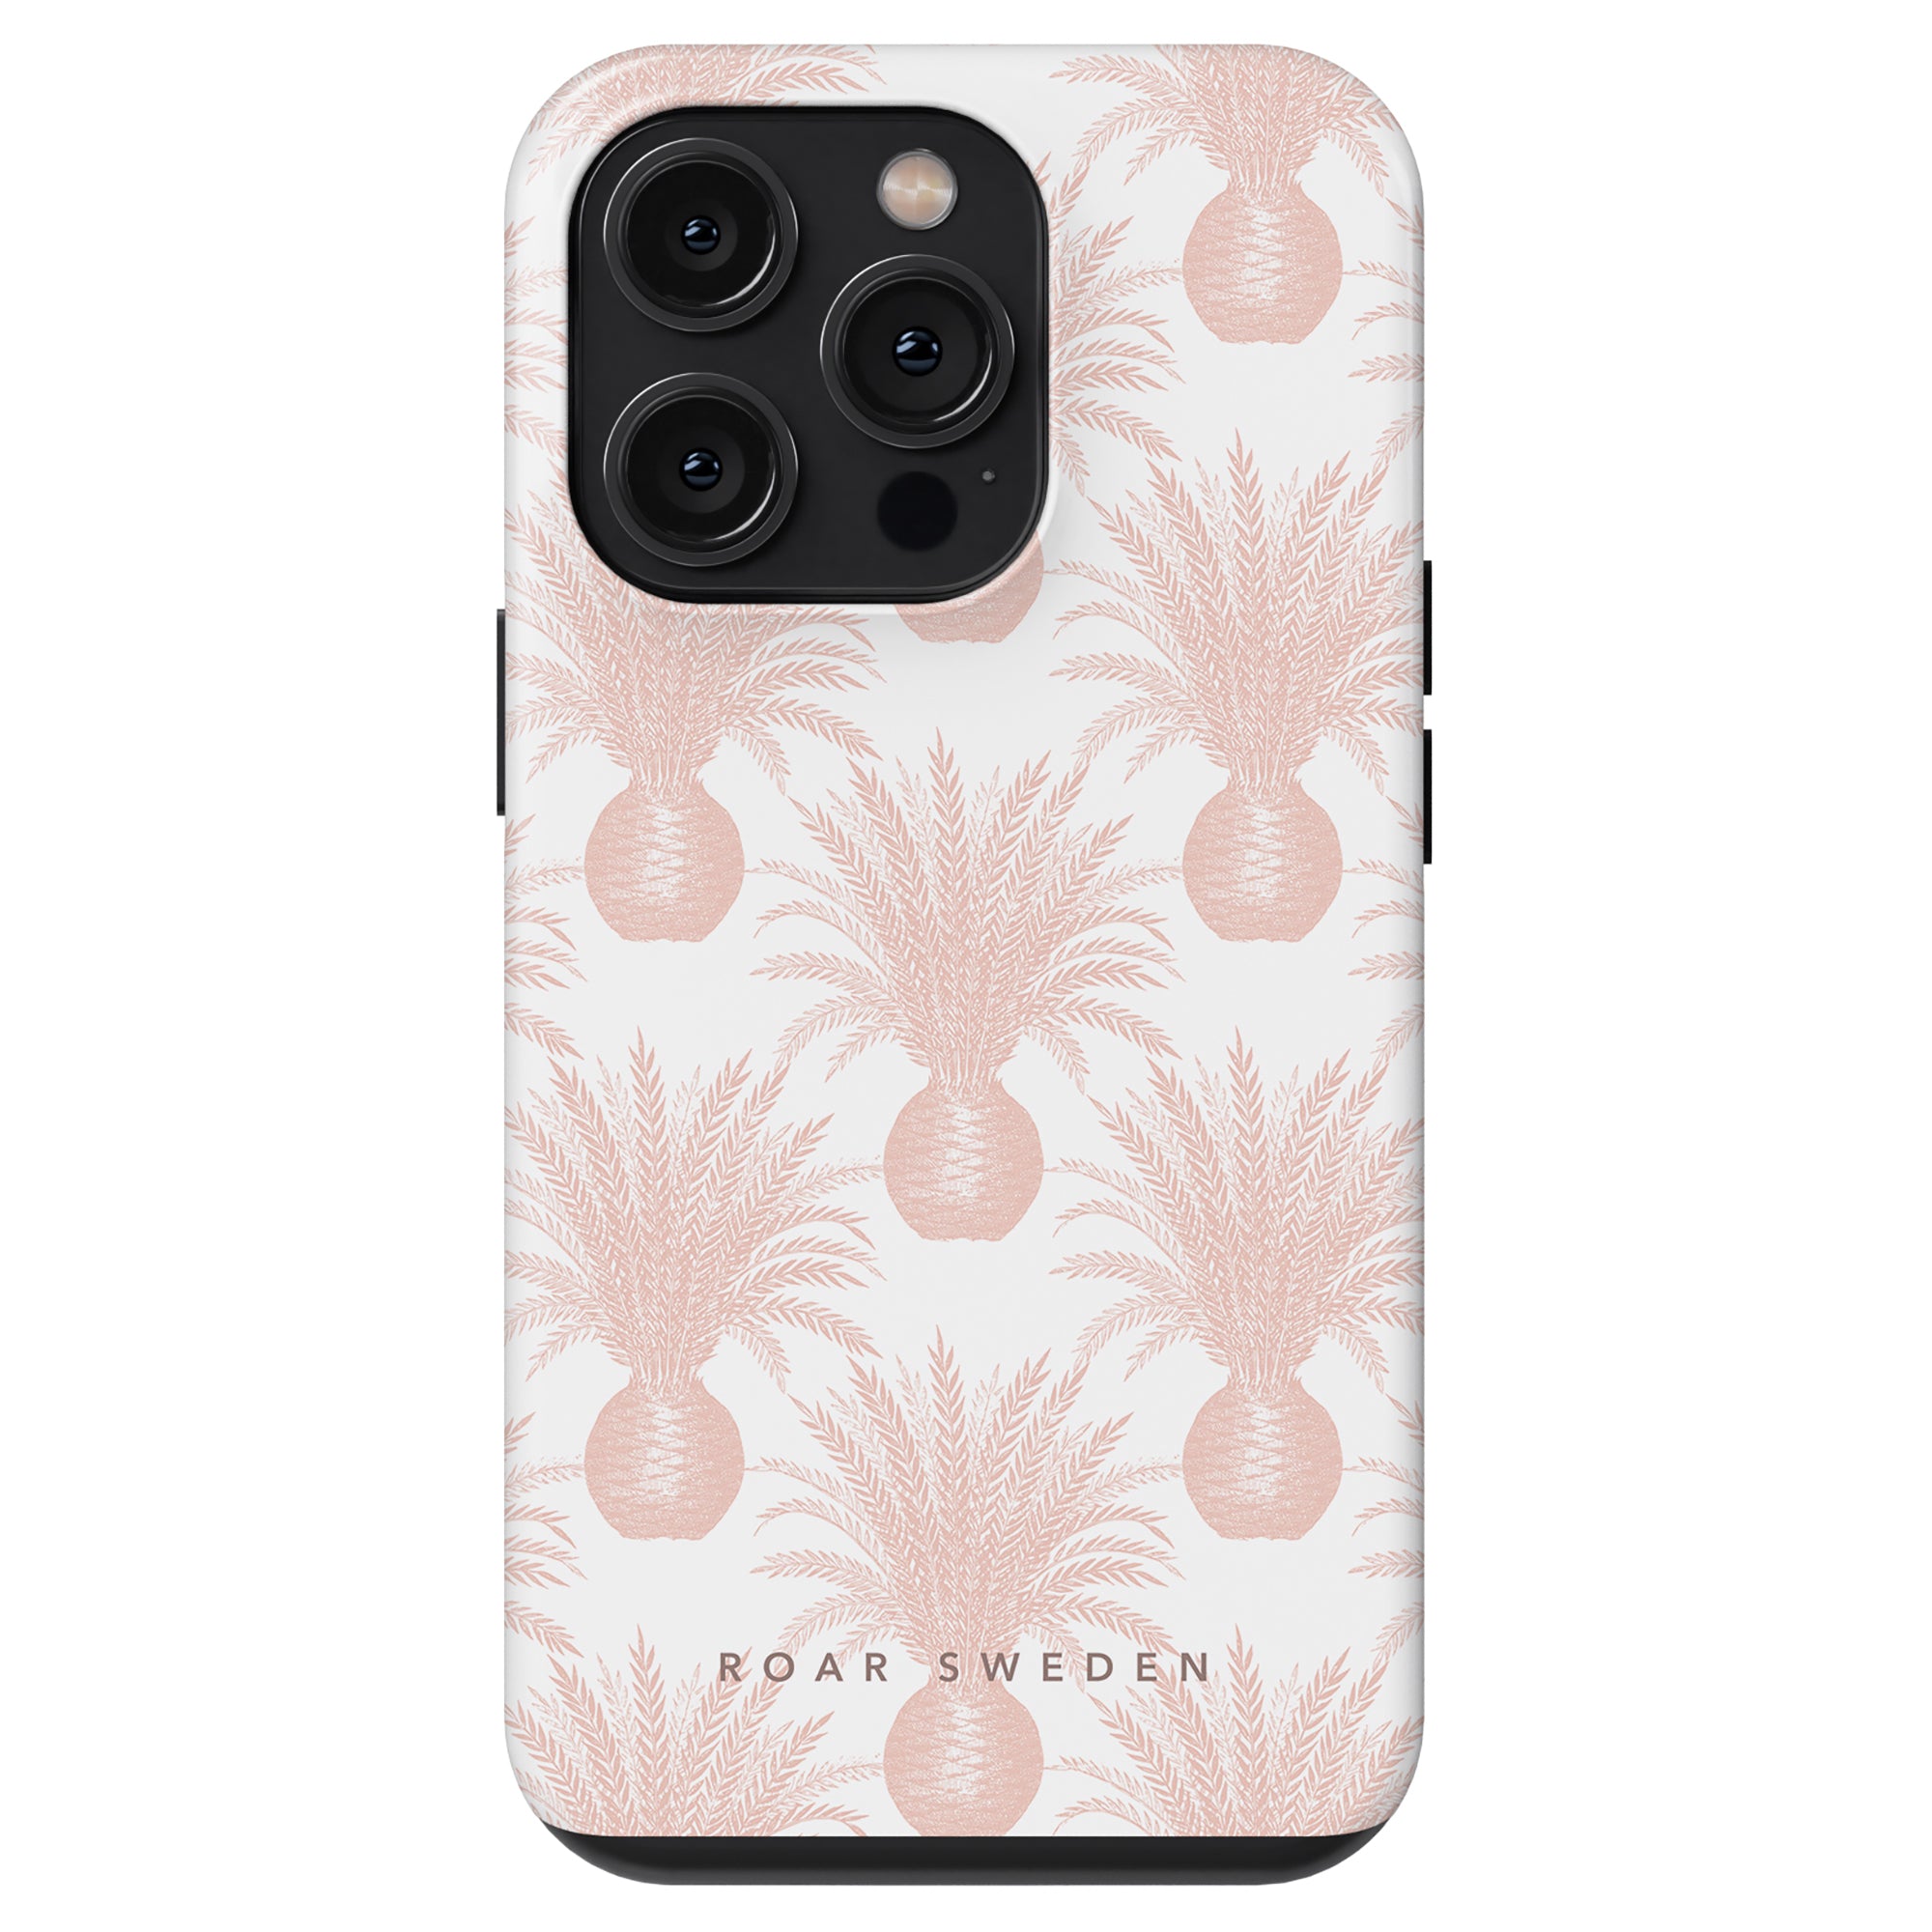 A smartphone with a Pink Pineapple - Tough Case.